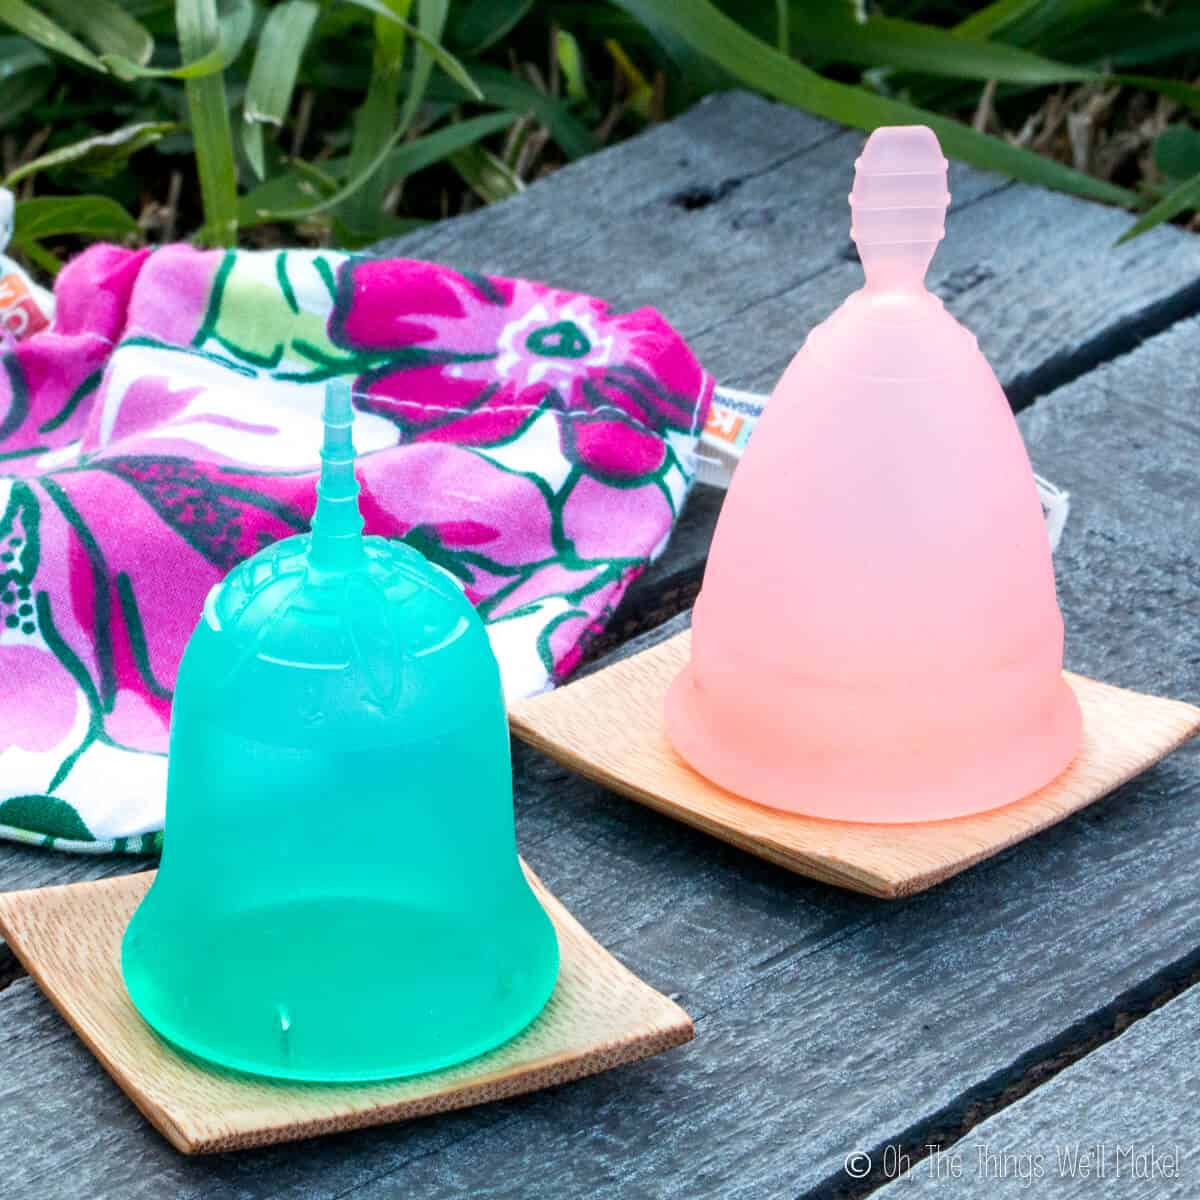 Two menstrual cups, one green Sckoon and one pink generic placed on square wooden platters with a floral bag behind them.